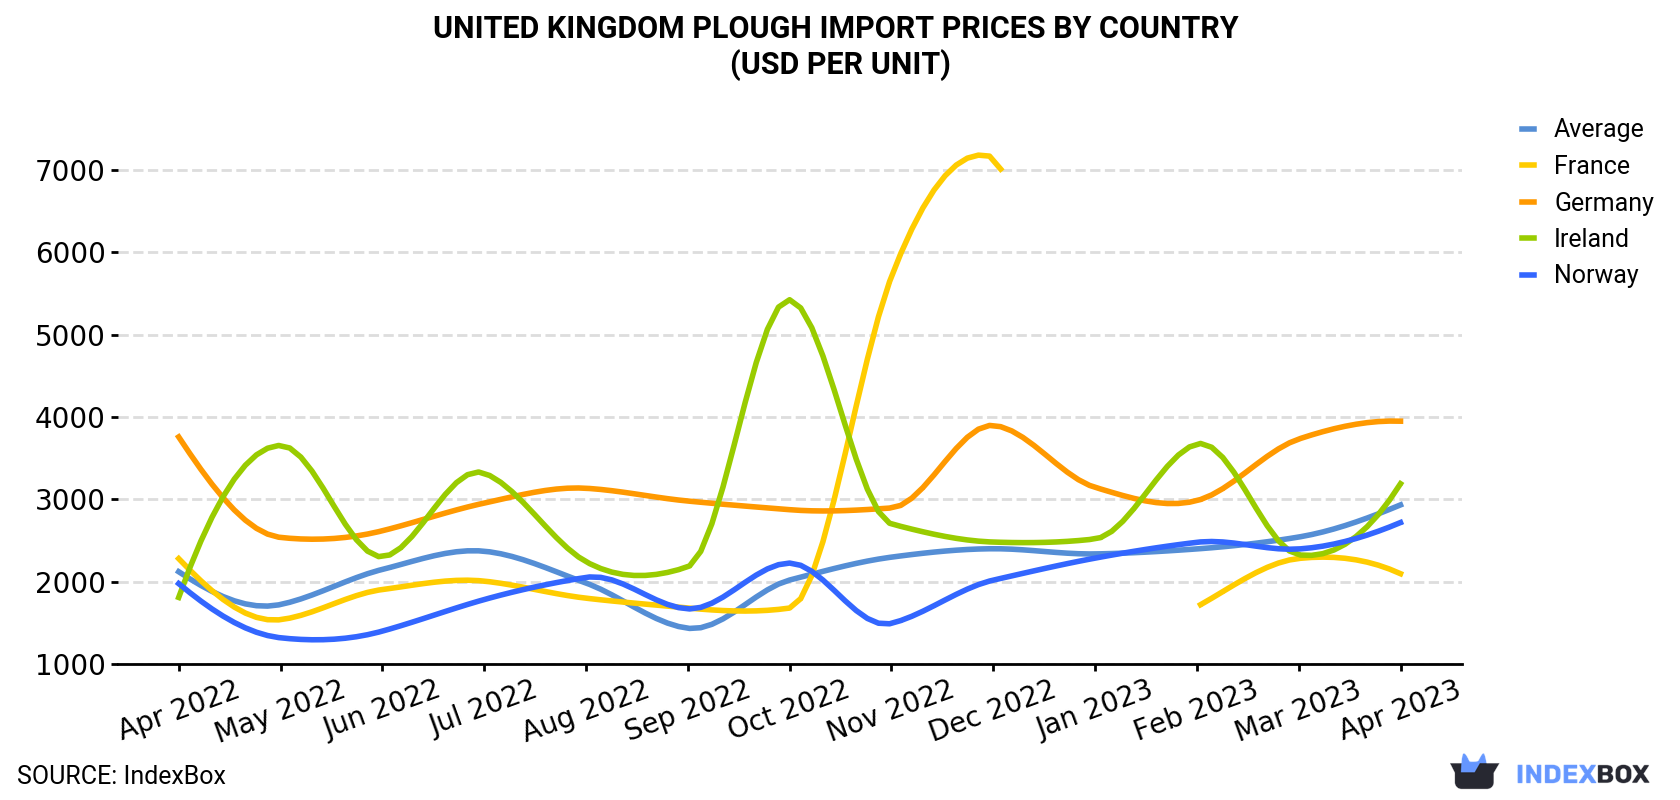 United Kingdom Plough Import Prices By Country (USD Per Unit)